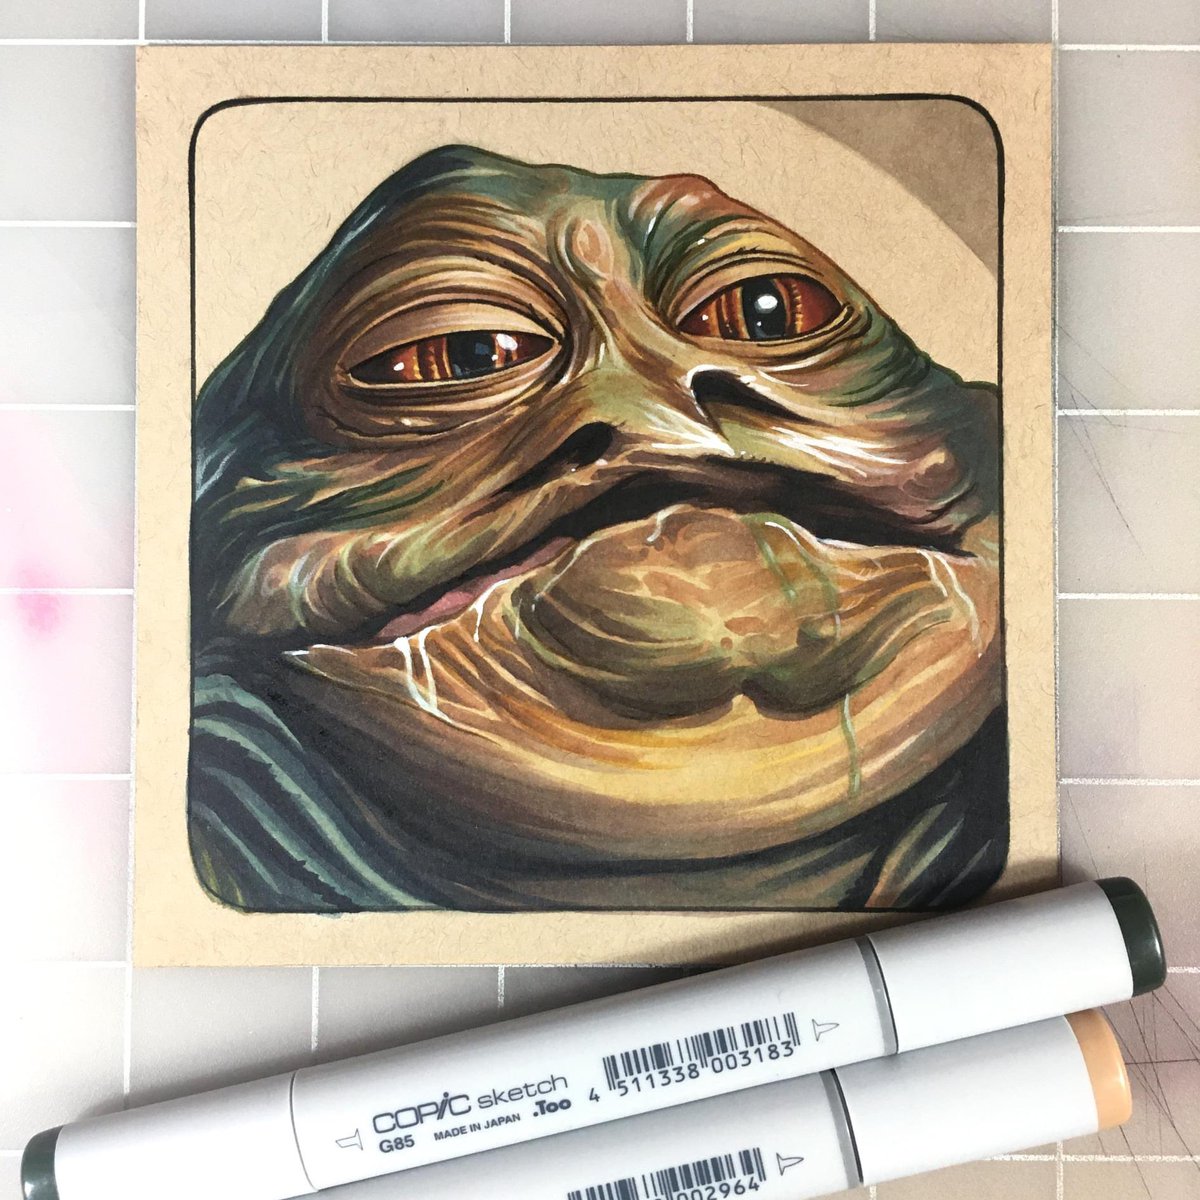 Jabba the Hutt on toned tan paper from this day in 2021 #StarWars